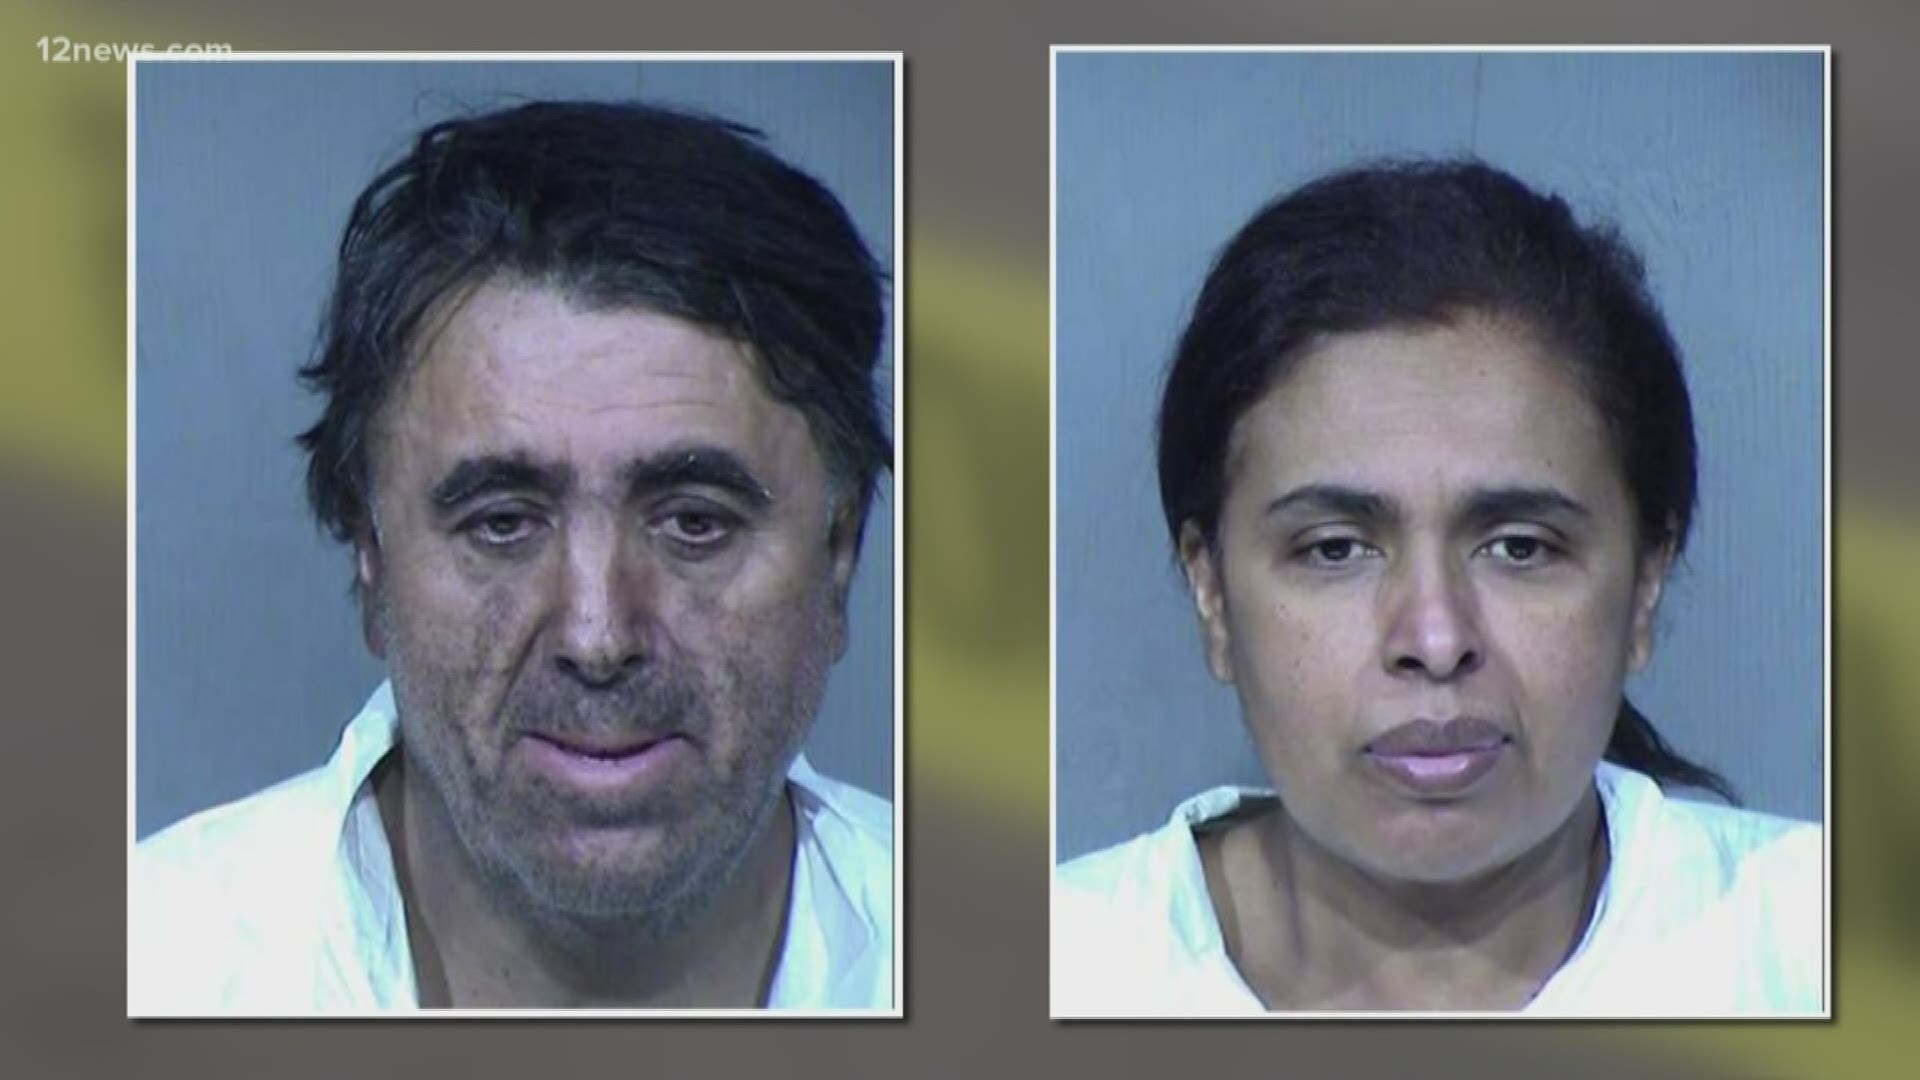 Phoenix police say Rafael and Maribel Loera were keeping the girl's remains in the attic. The remains were found when the Loera's allegedly set the house on fire.